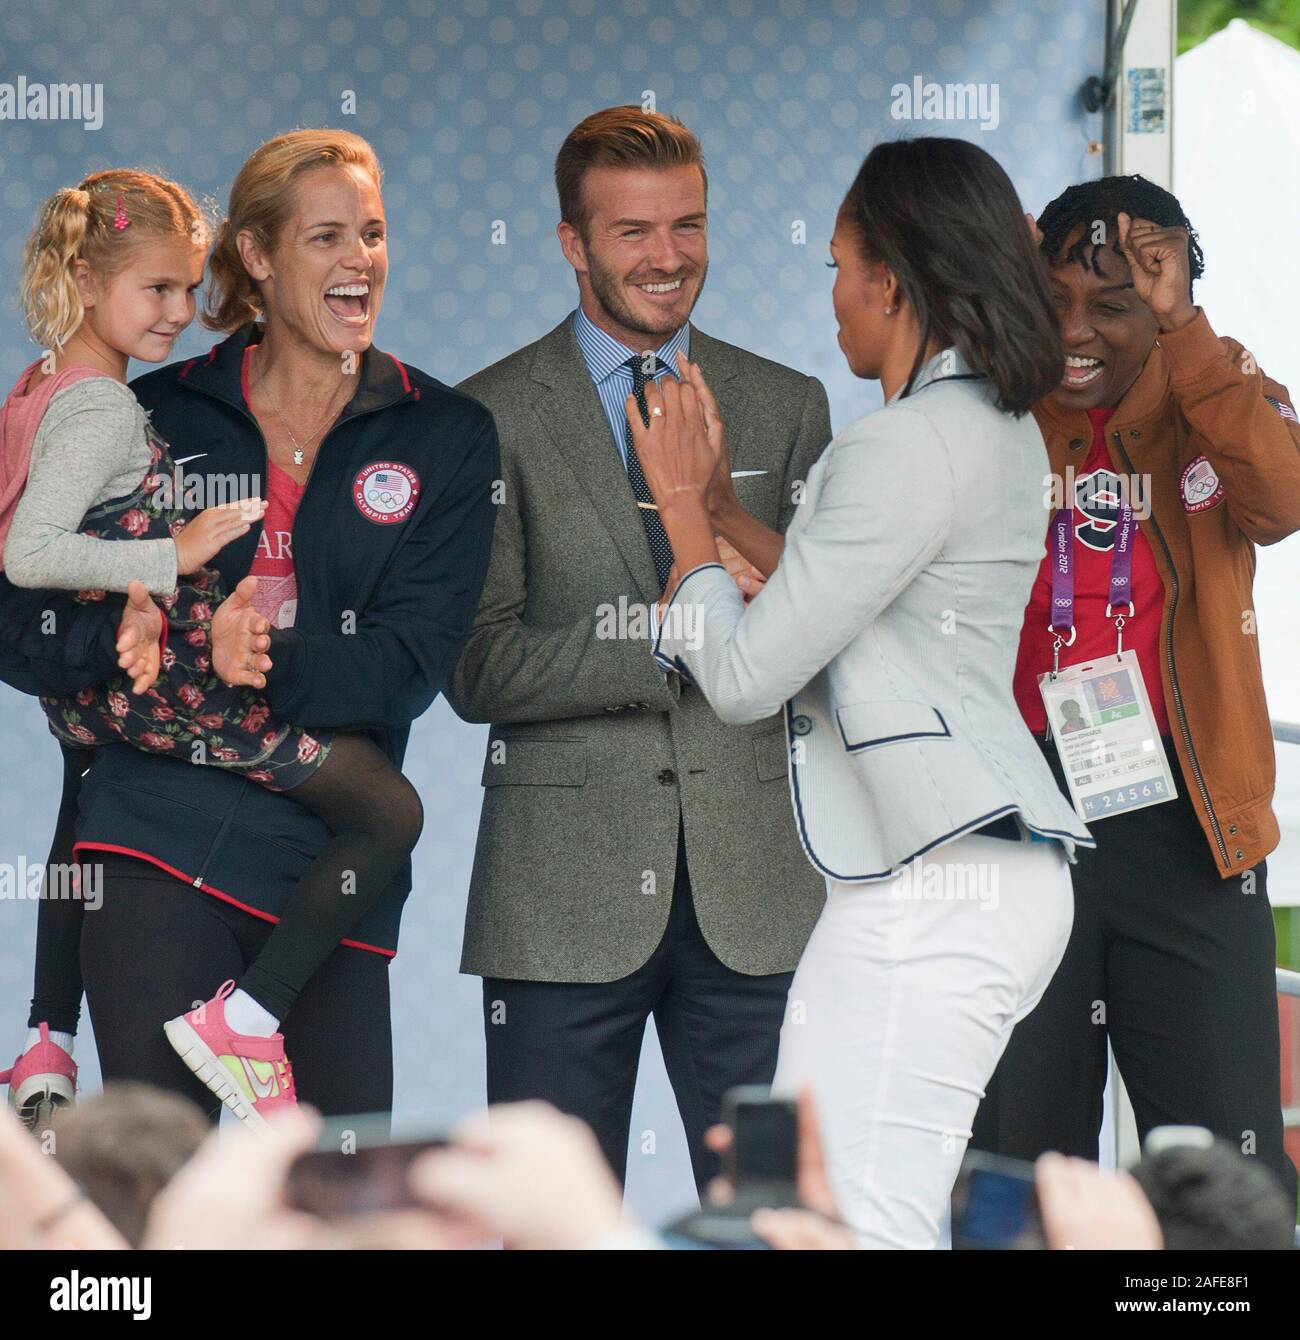 Wearing a patriotic outfit America's first Lady Michelle Obama attending a party for 'Let's move' campaign at Winfield House, The U.S. Ambassador's residence in London ahead of  the Olympic Games being held in the U.K. Stock Photo